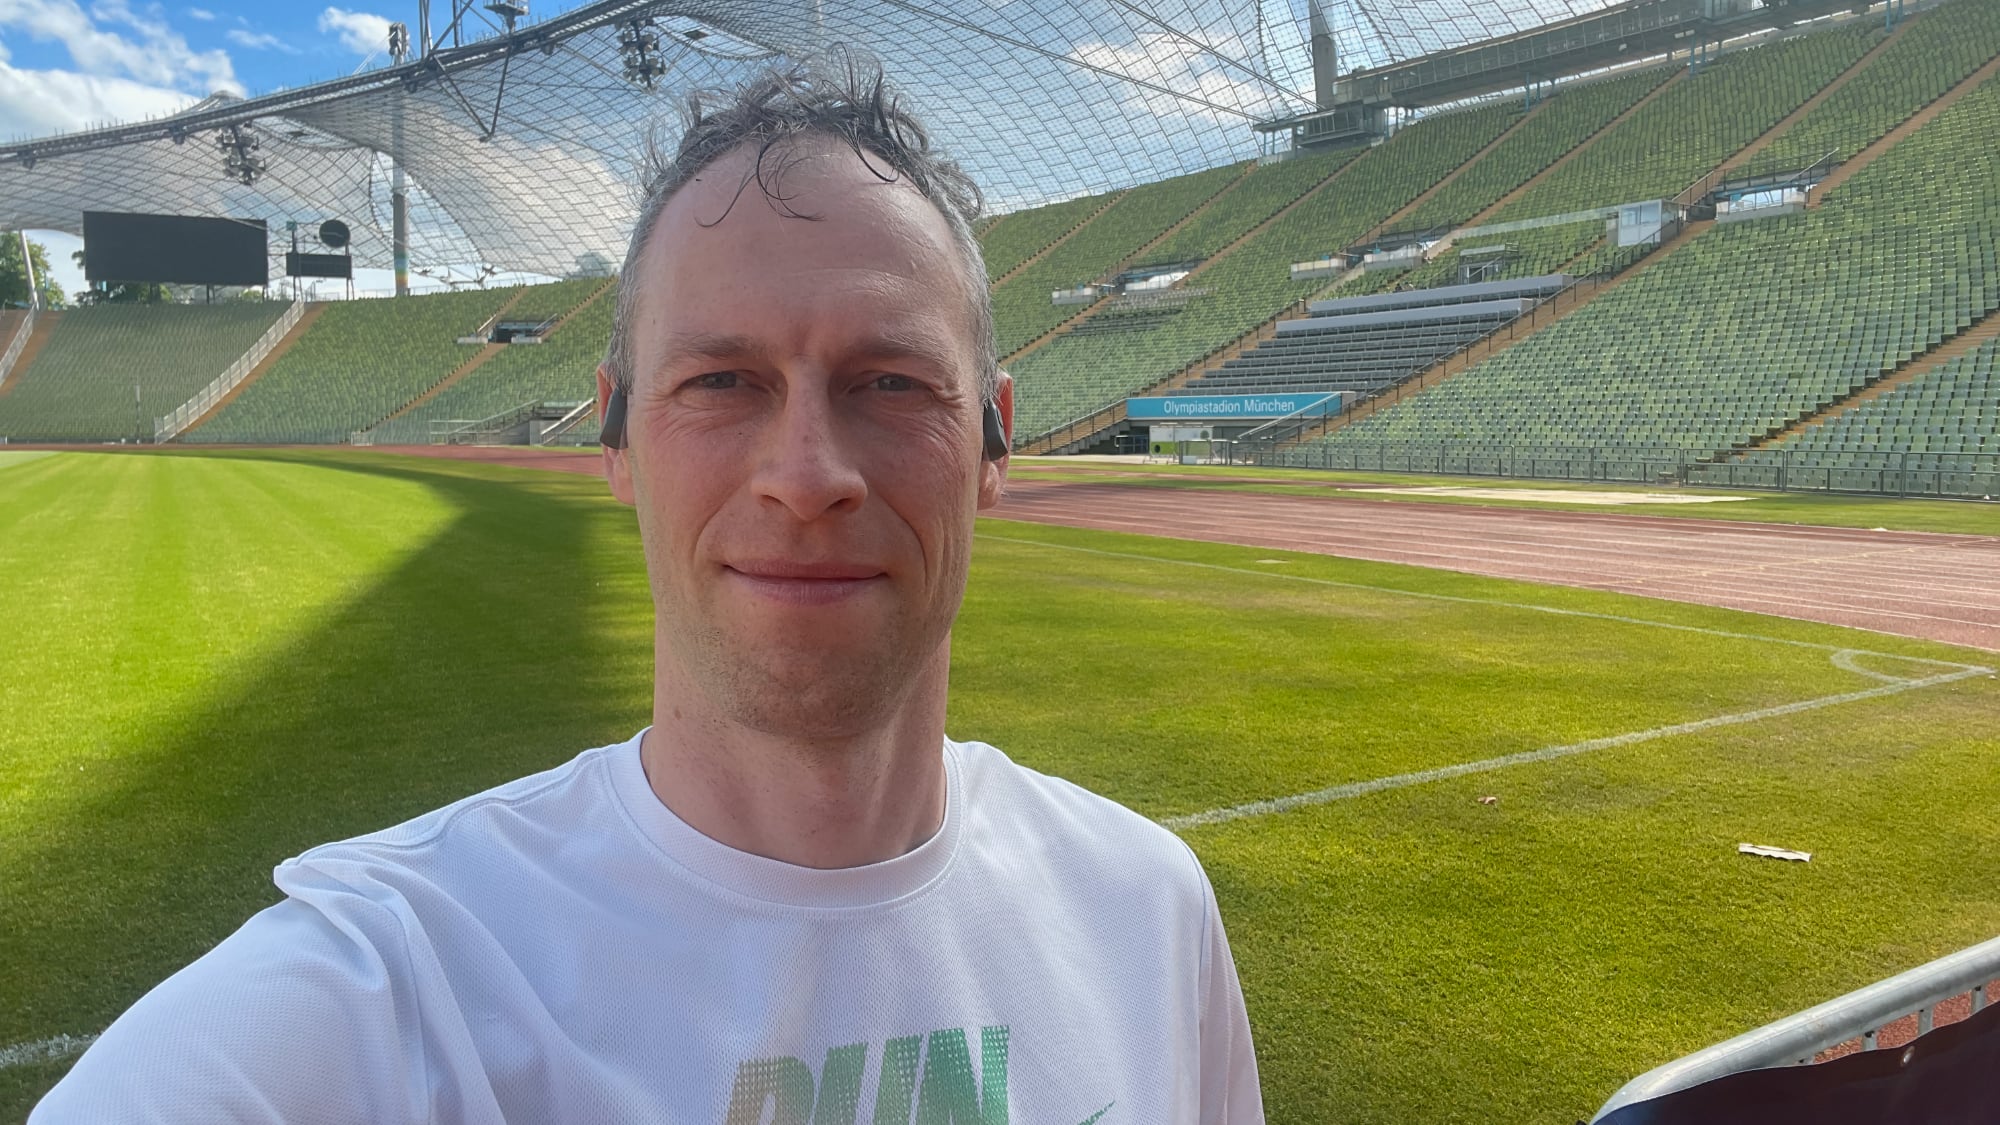 After the finish in the Olympiastadion